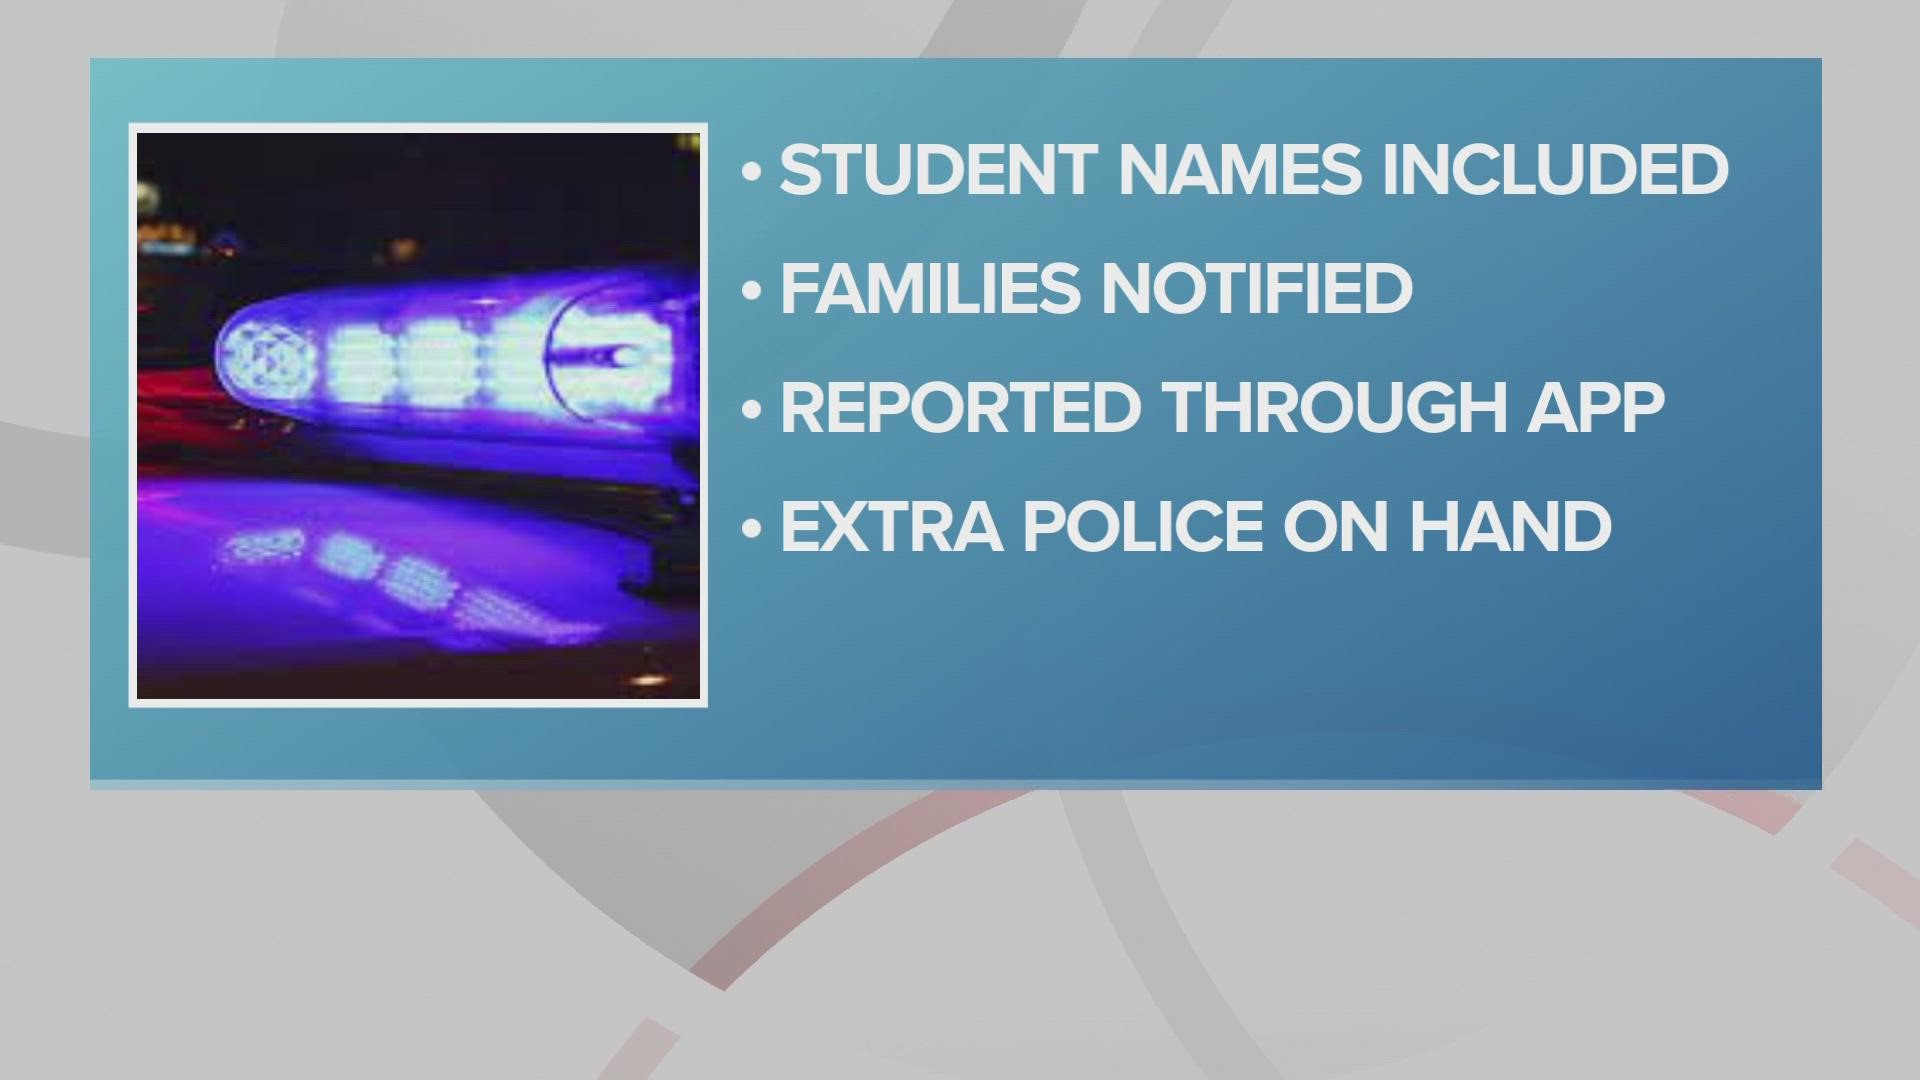 According to officials, the threat involved 'a list of student names,' and administrators were alerted to its existence through the district's 'STOPit' app.